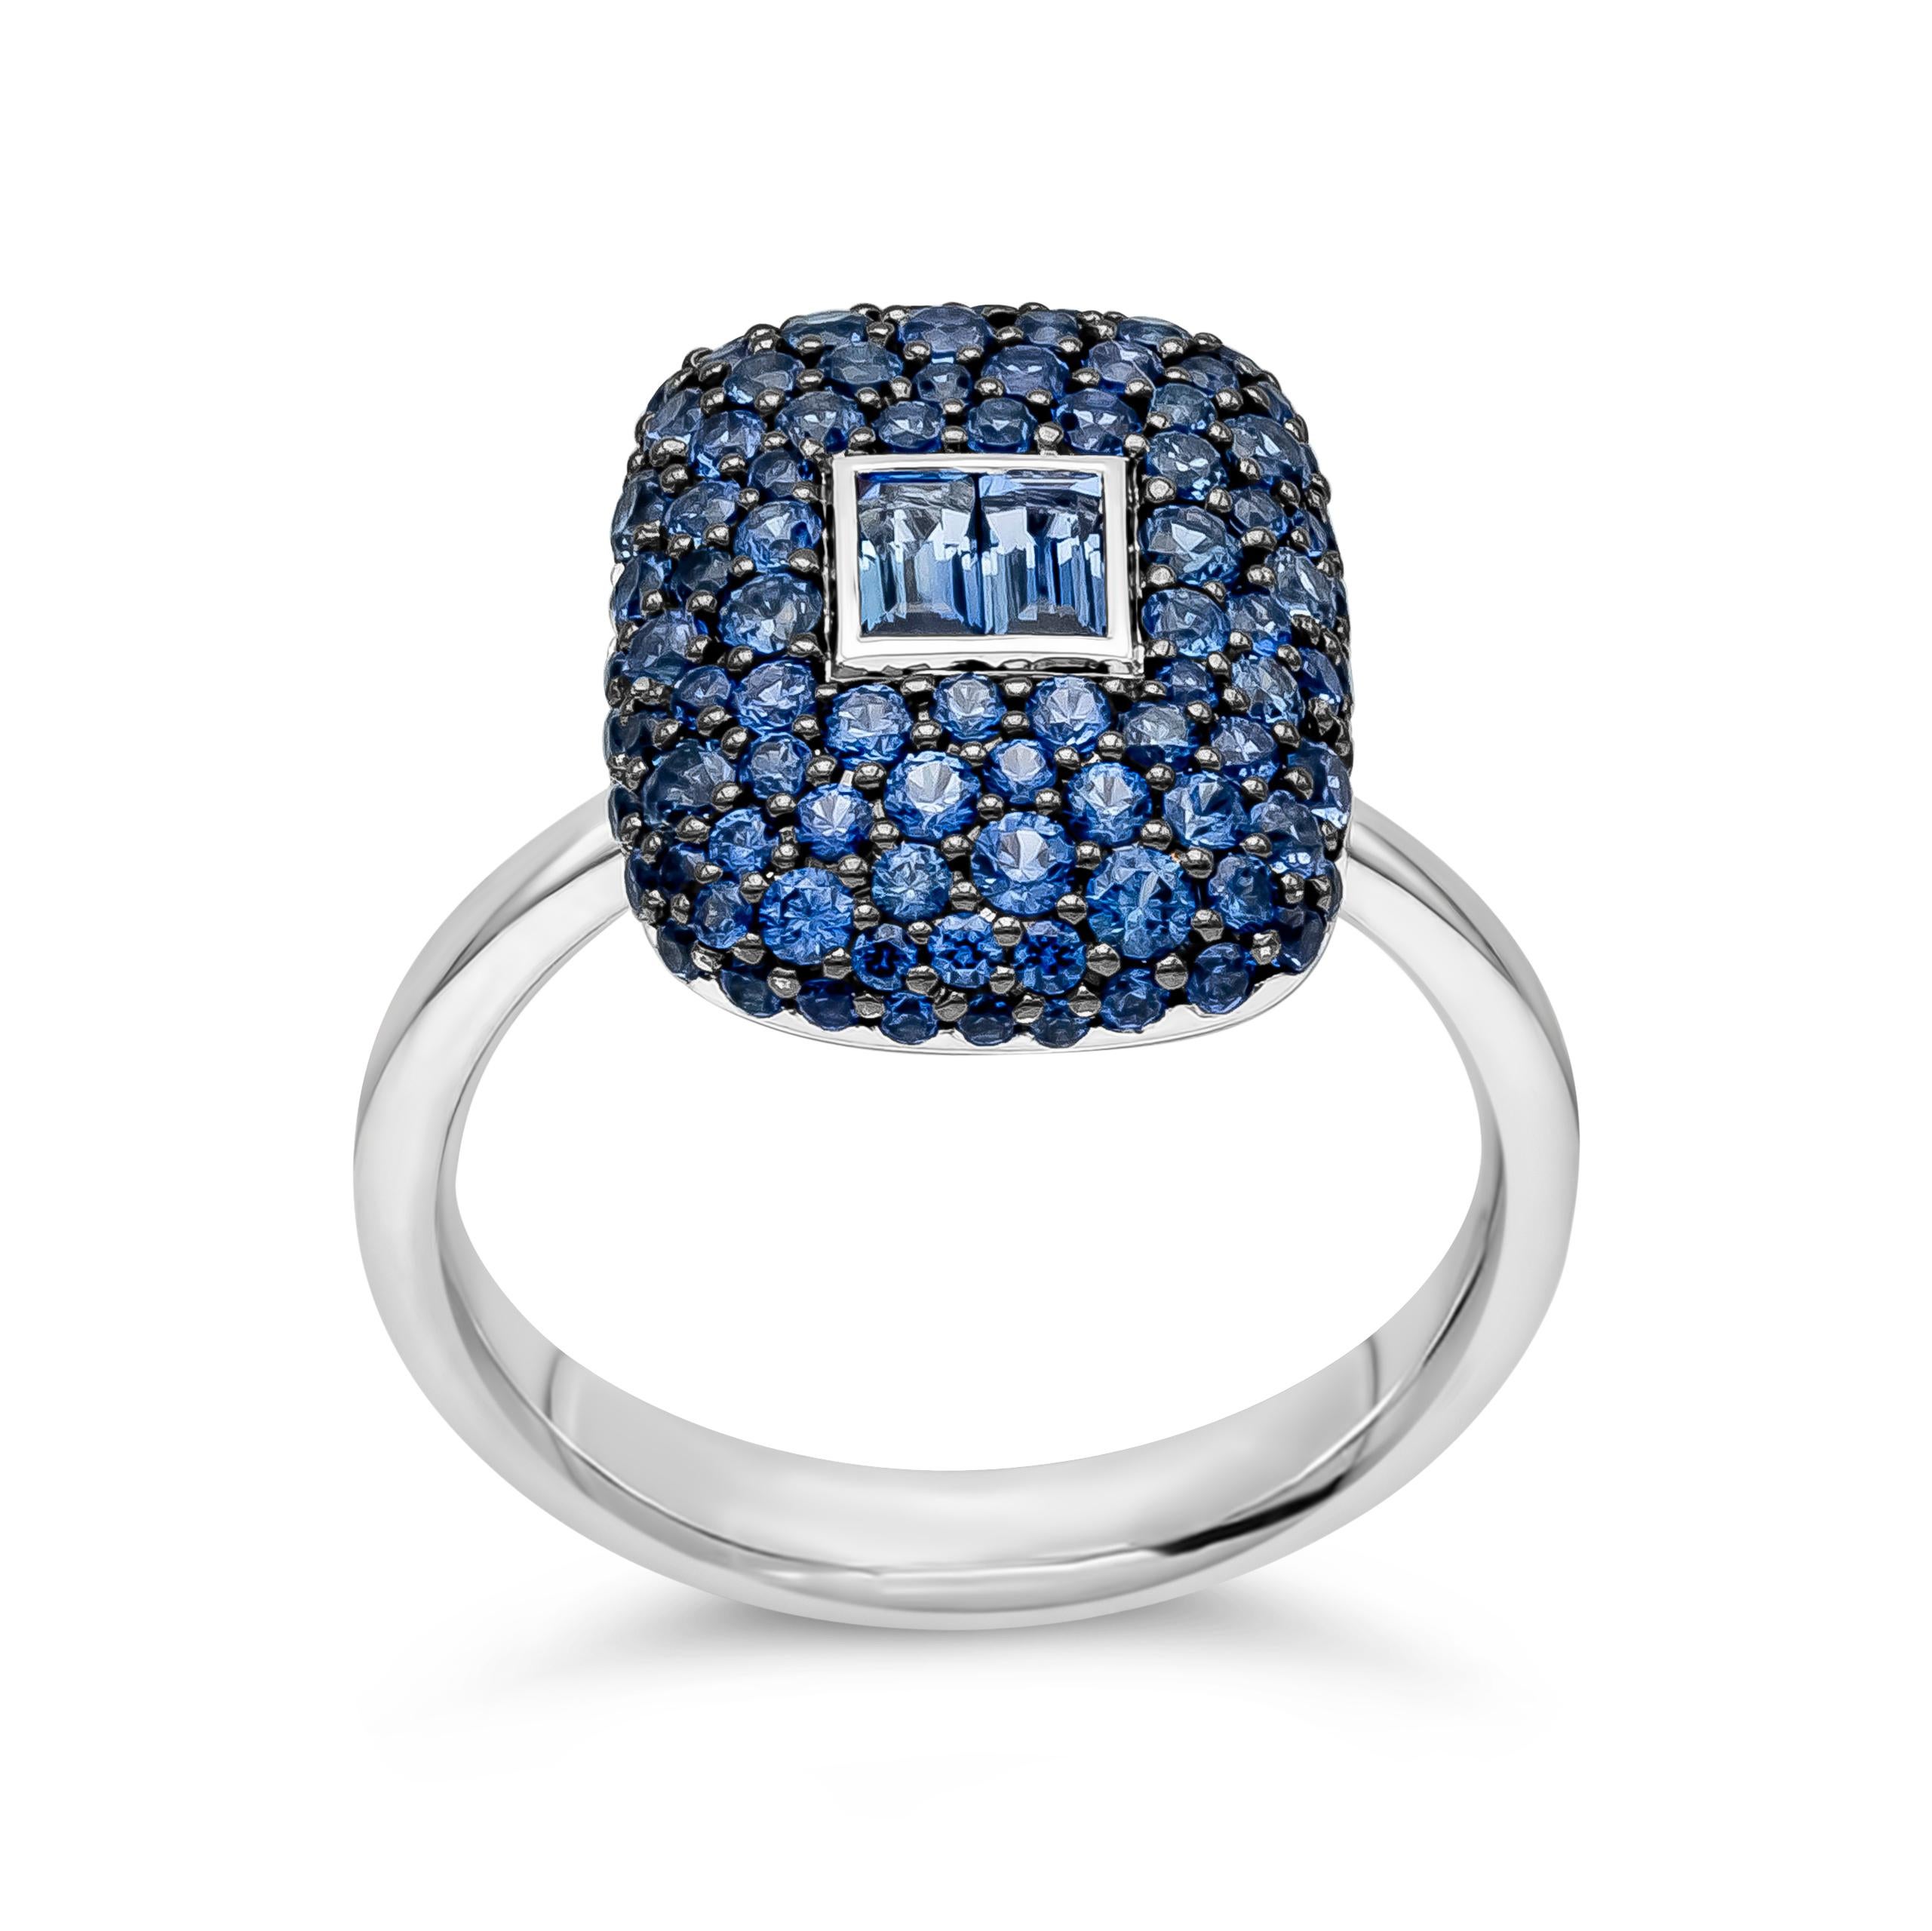 Contemporary Roman Malakov 1.85 Carat Total Mixed Cut Blue Sapphire Fashion Ring For Sale